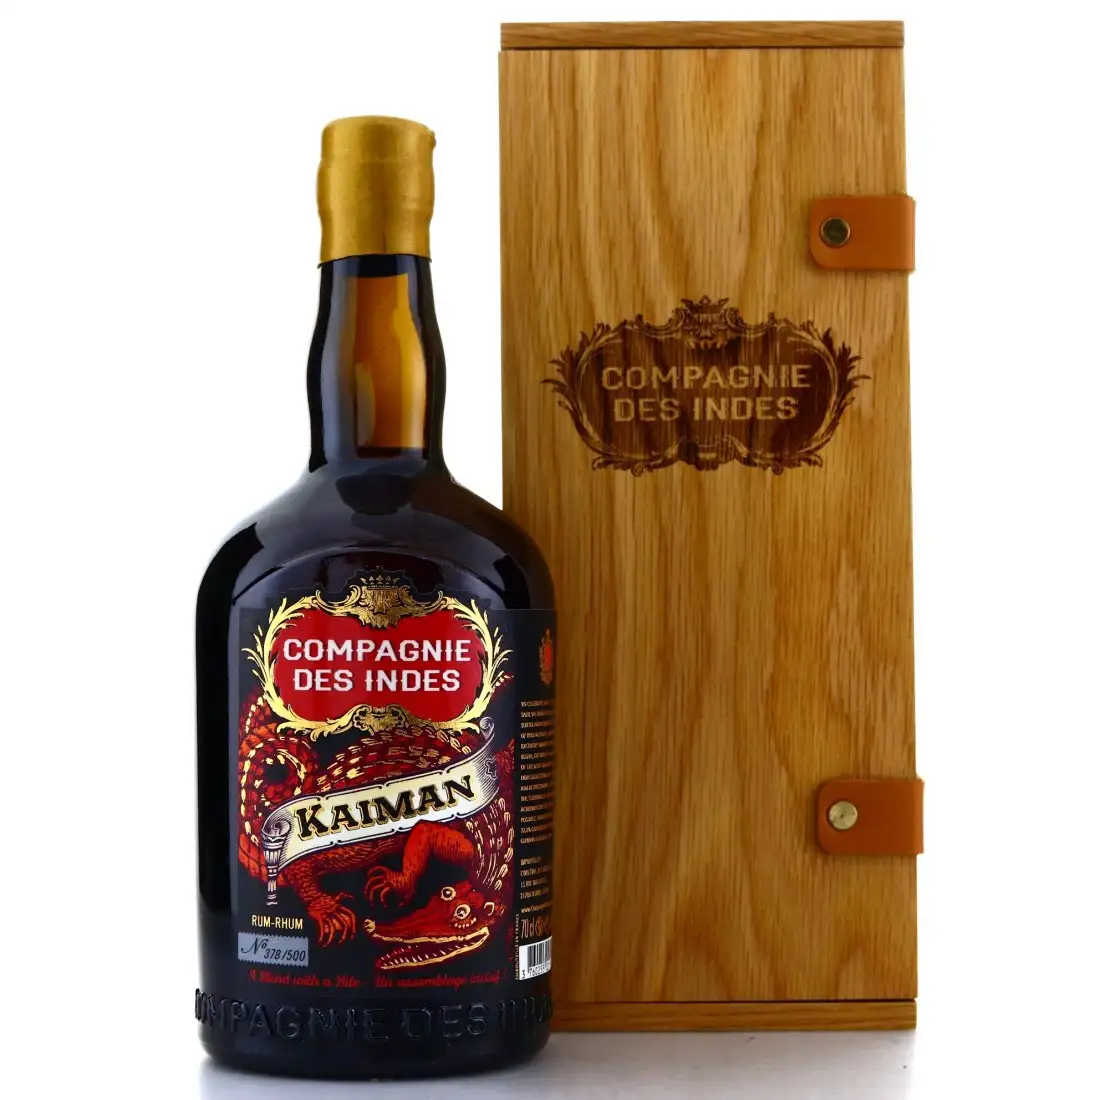 Image of the front of the bottle of the rum Kaiman